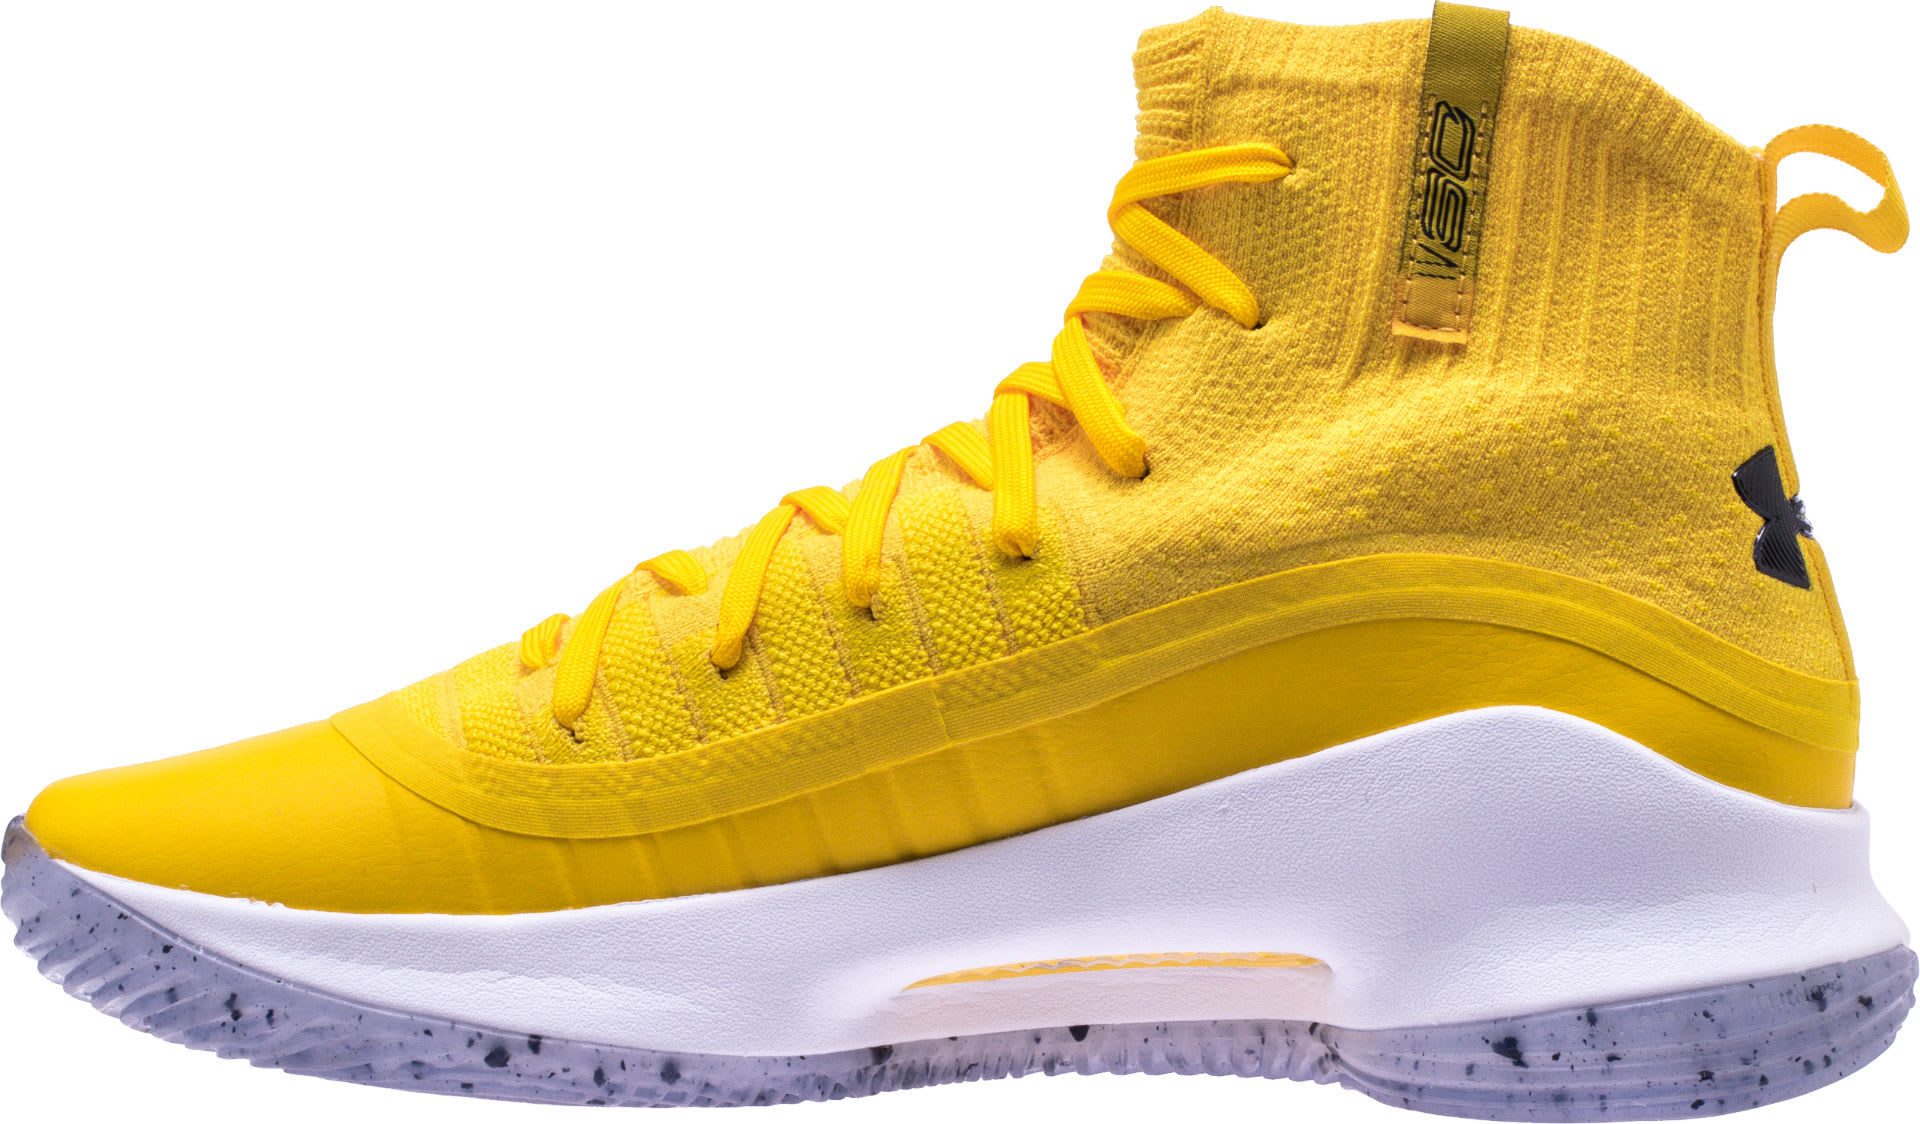 Shoe Palace Under Armour Curry 4 &#x27;Yellow/Blue&#x27; 1298306-700 (Medial)